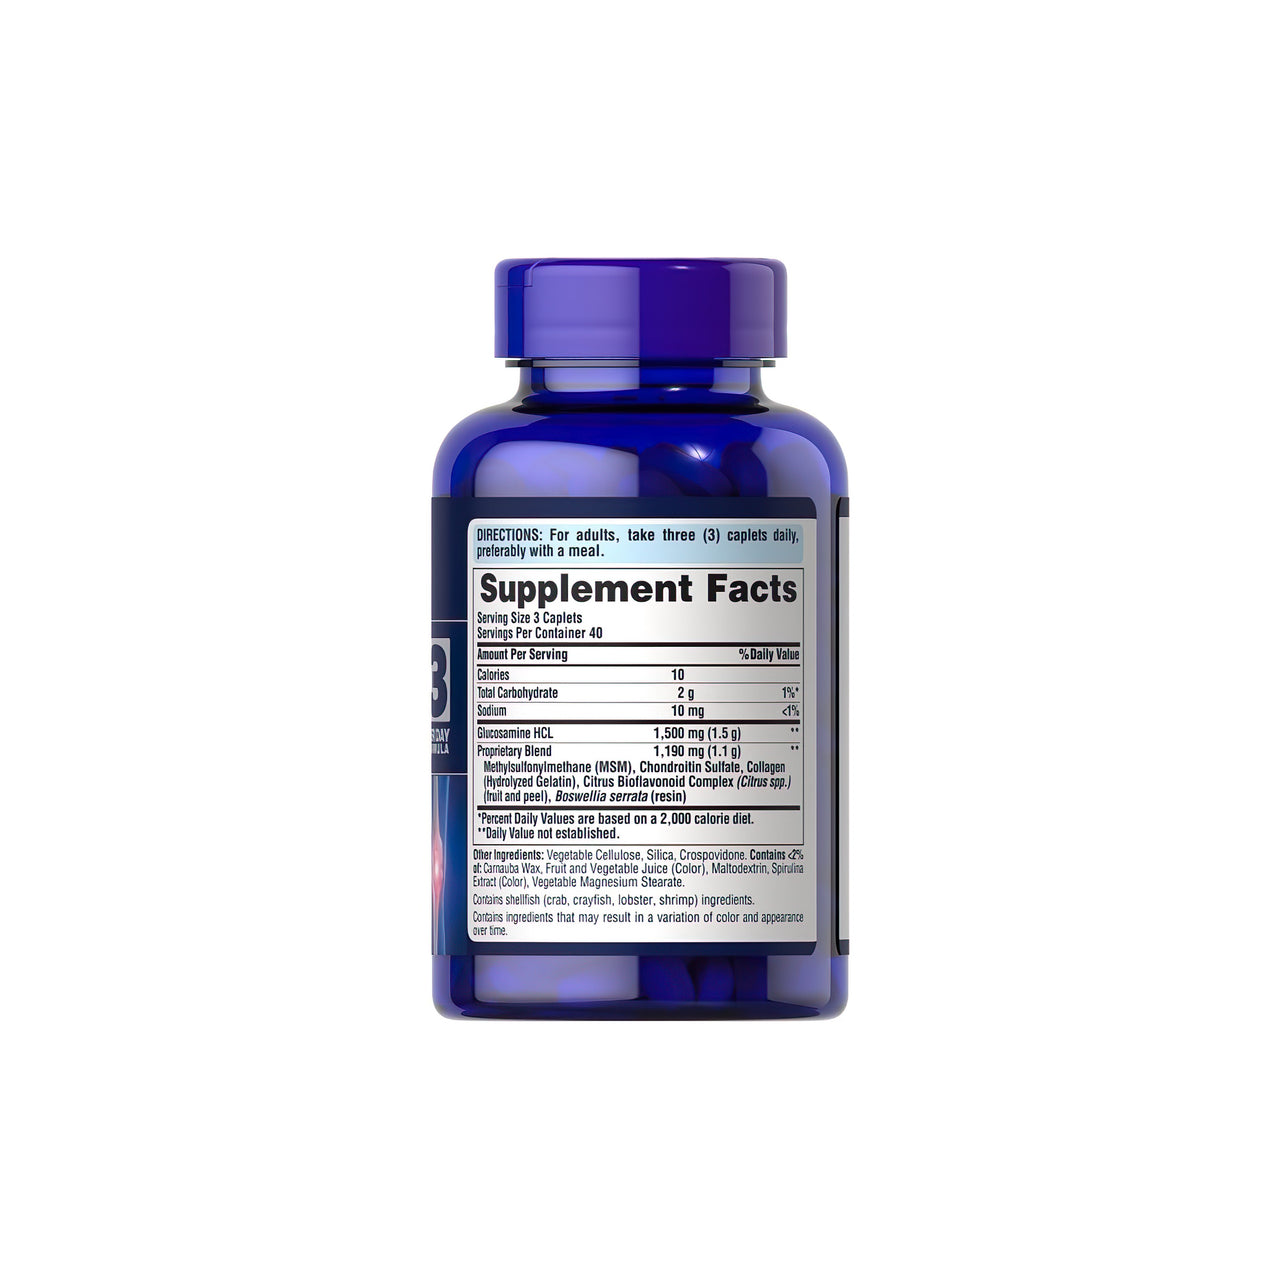 A bottle of Glucosamine, Chondroitin & MSM-3 Per Day Formula 120 coated caplets by Puritan's Pride on a white background.